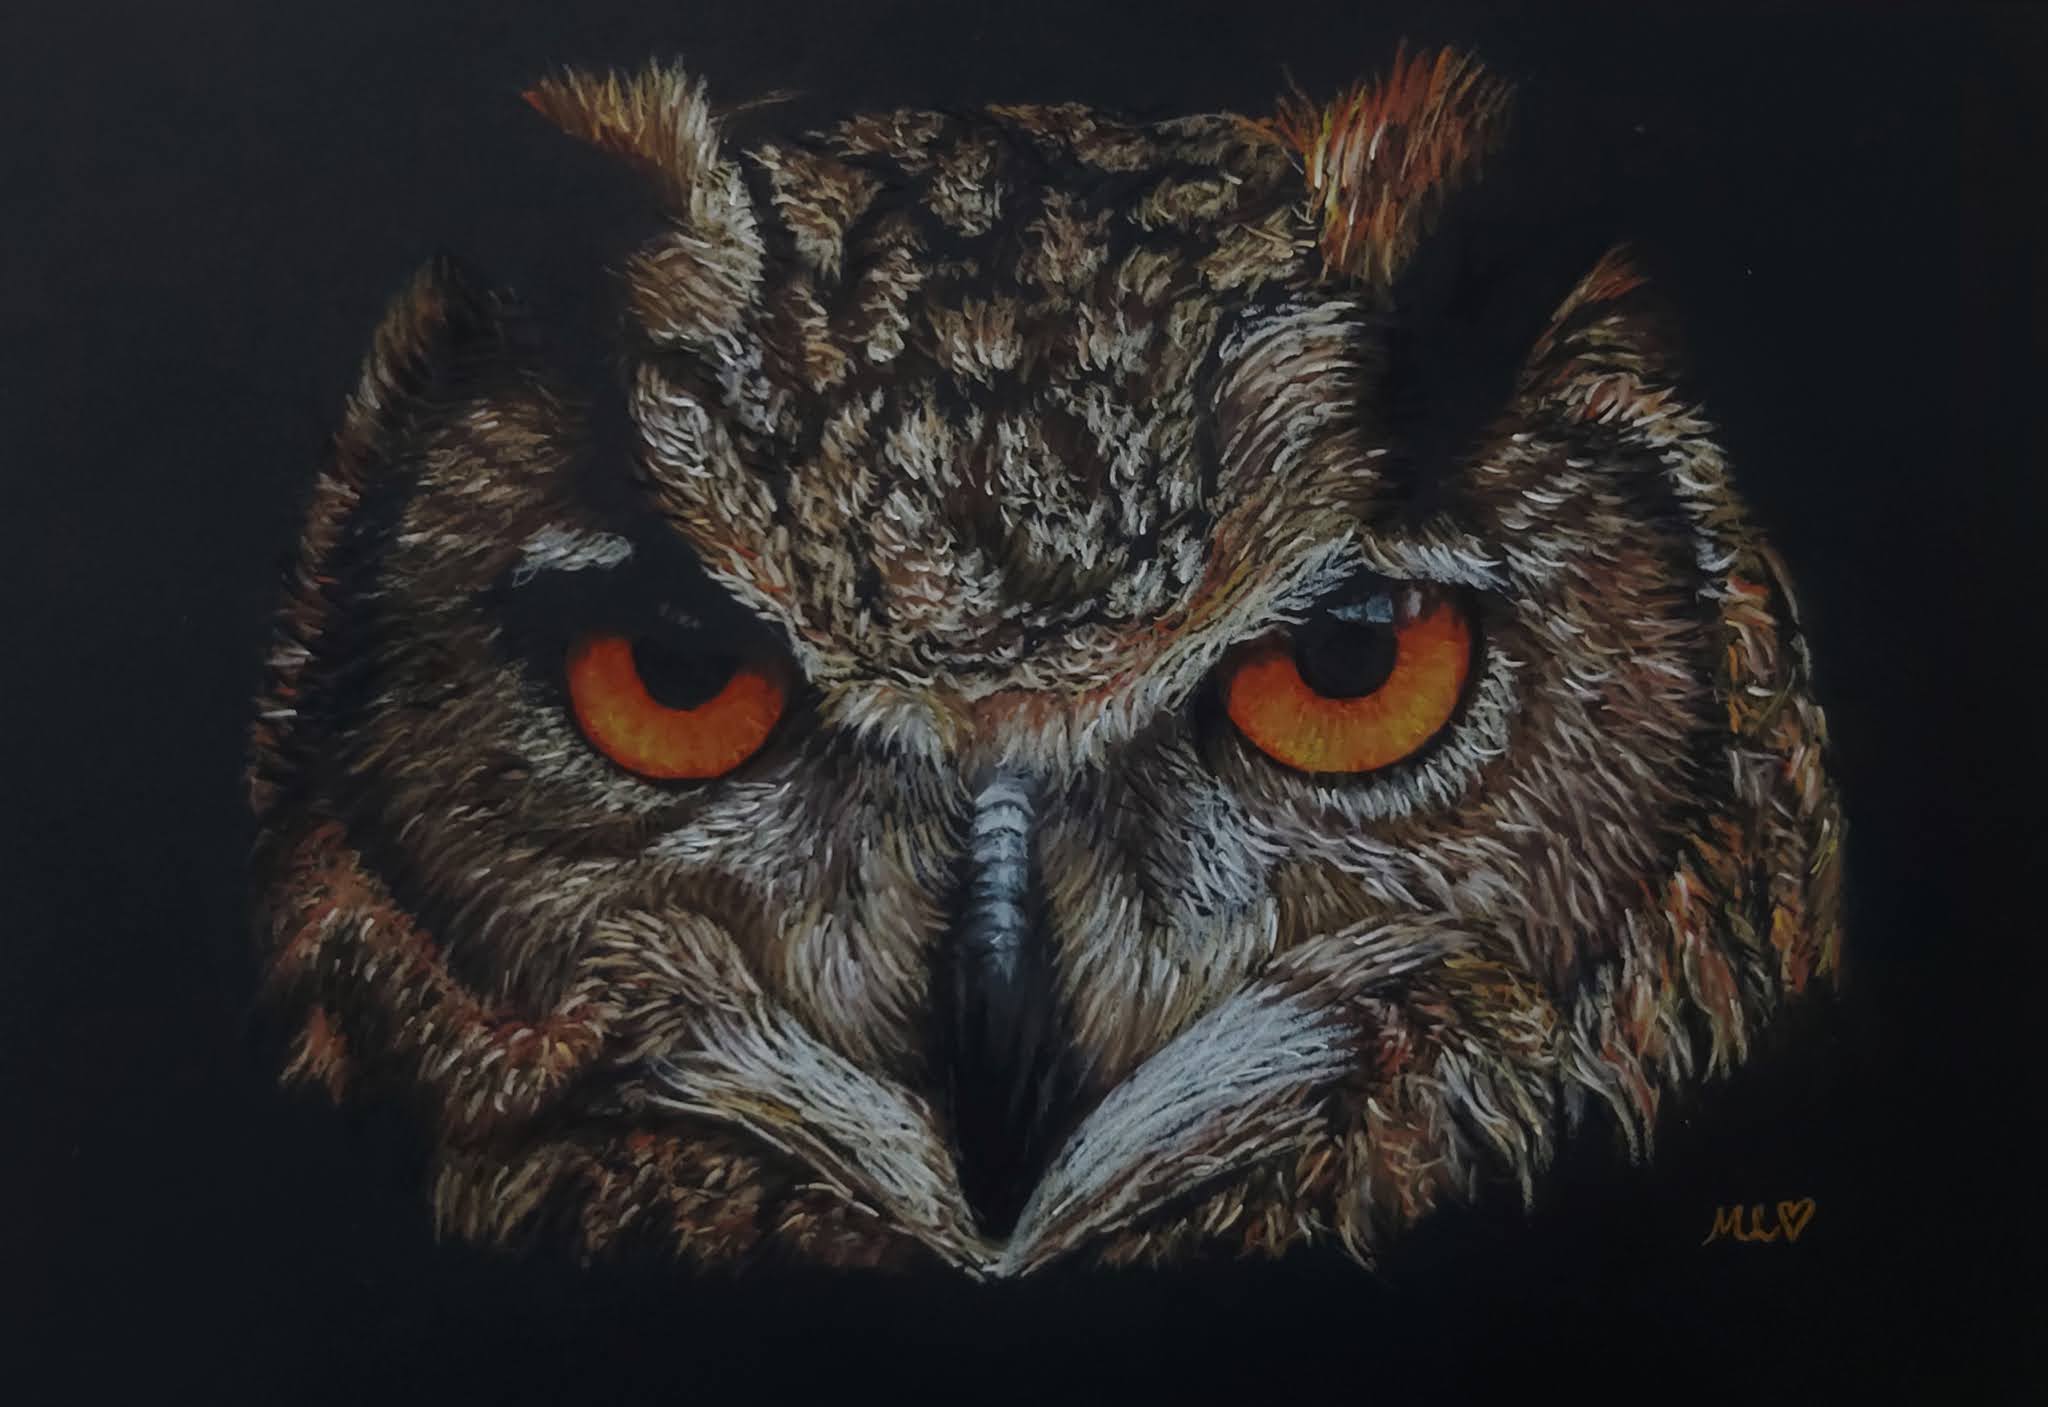 Oil Pastel Drawing on Black Paper - Step by Step